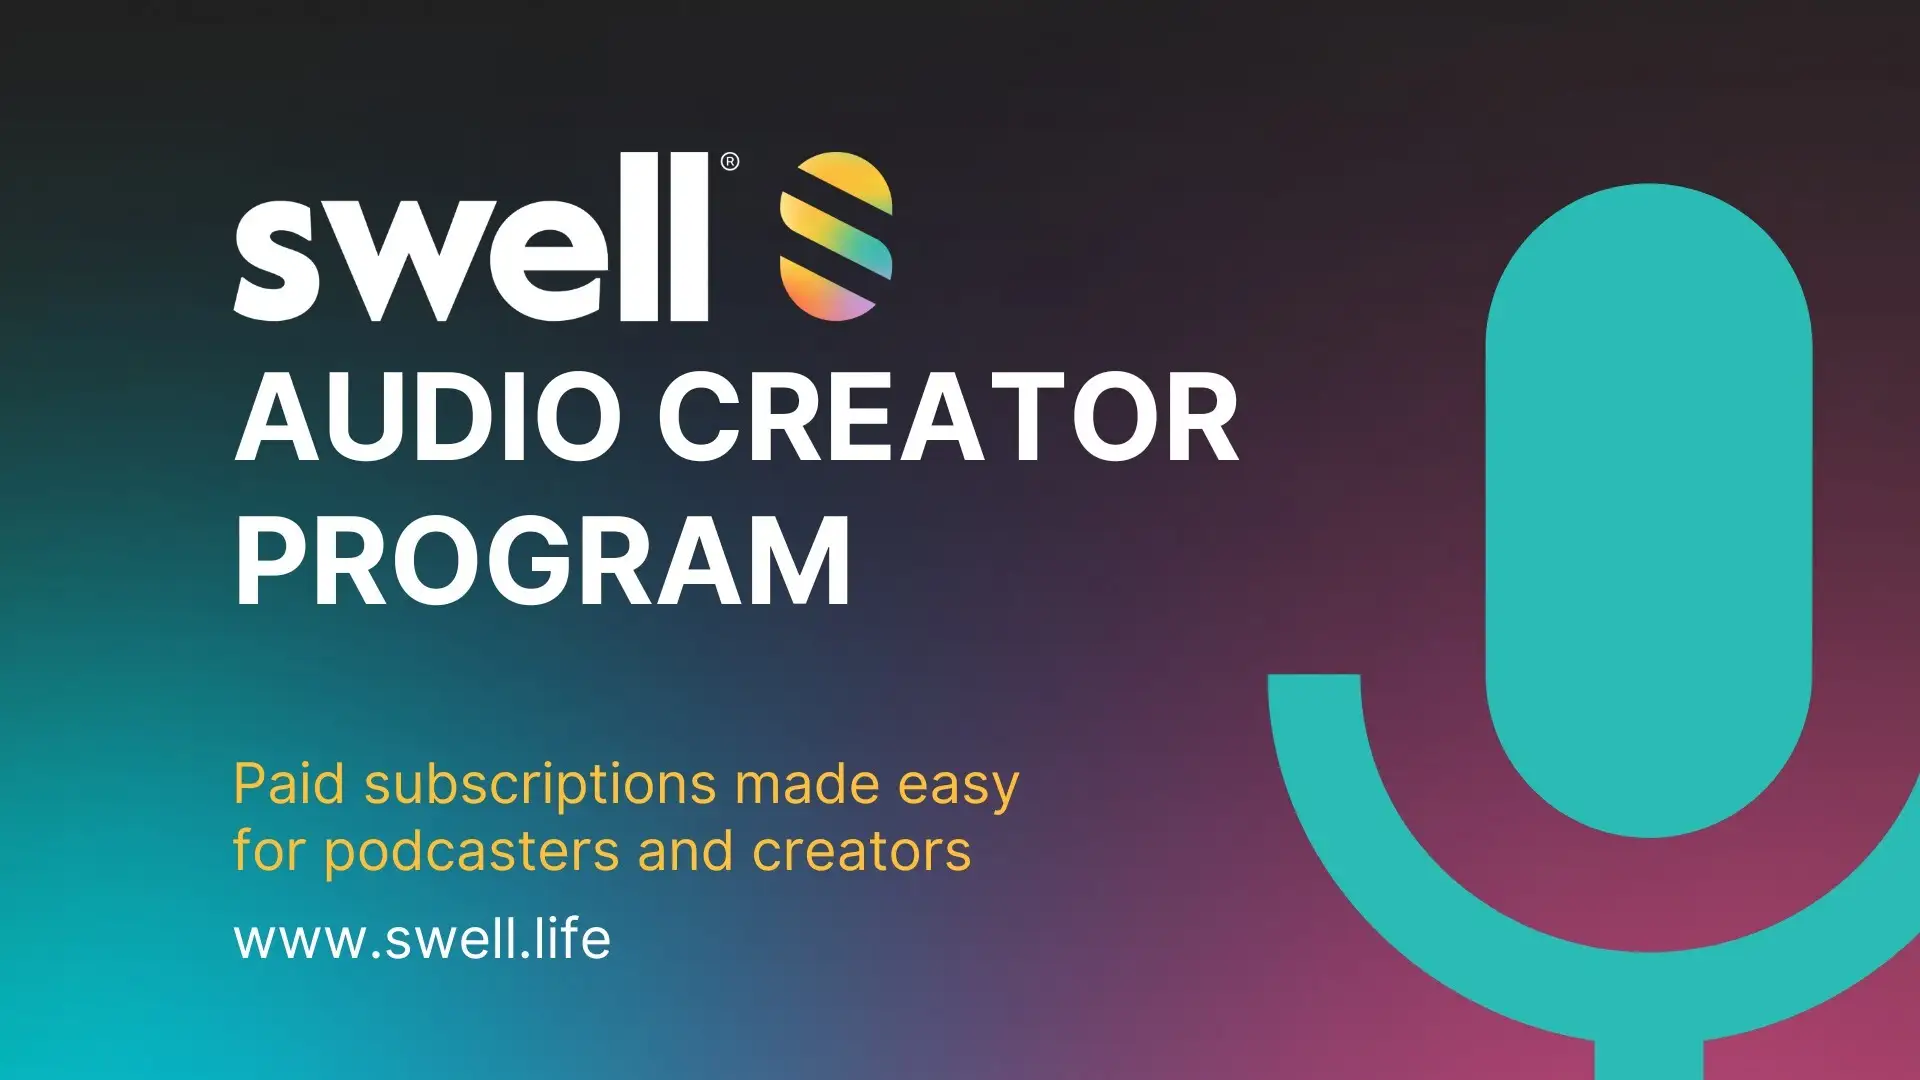 How to Join the Swell Audio Creator Program and start a Premium Swellcast